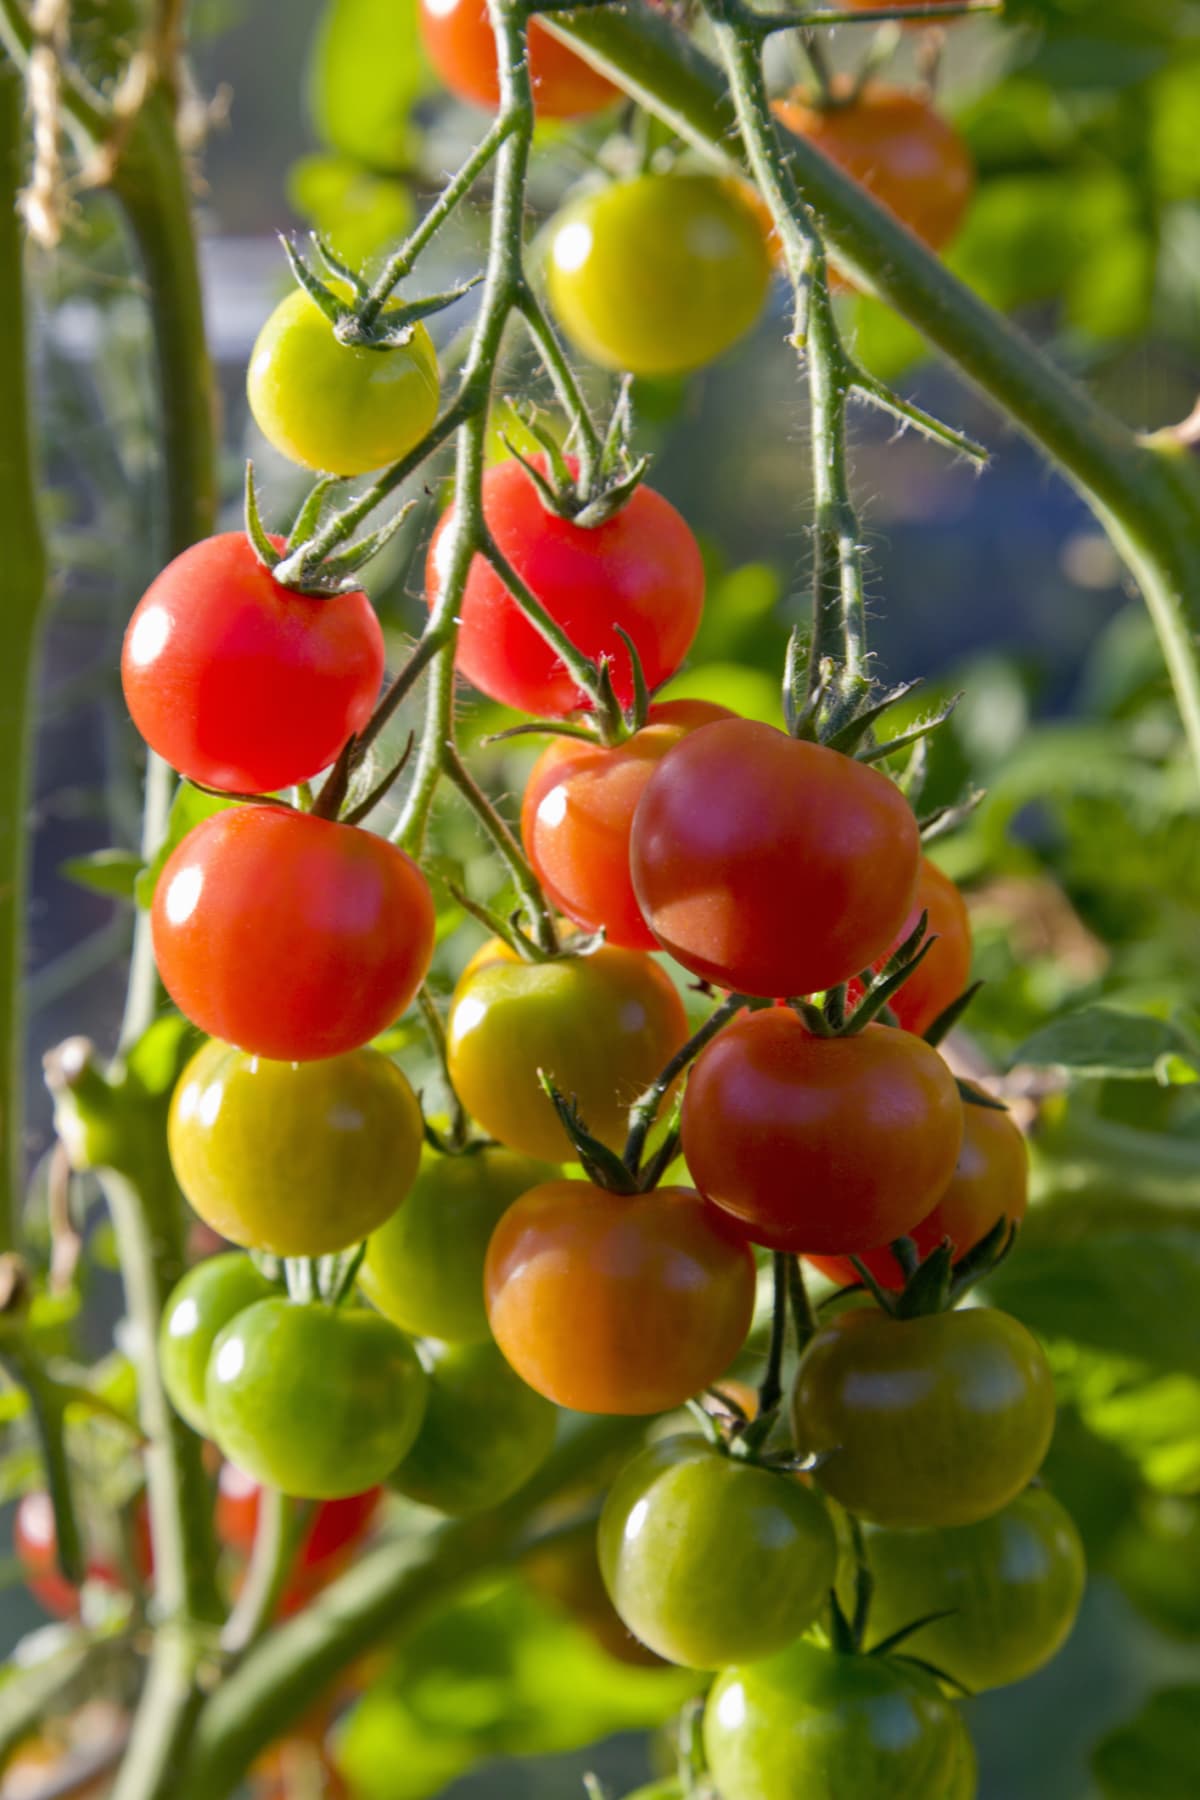 Cherry tomatoes of different ripeness on a vine